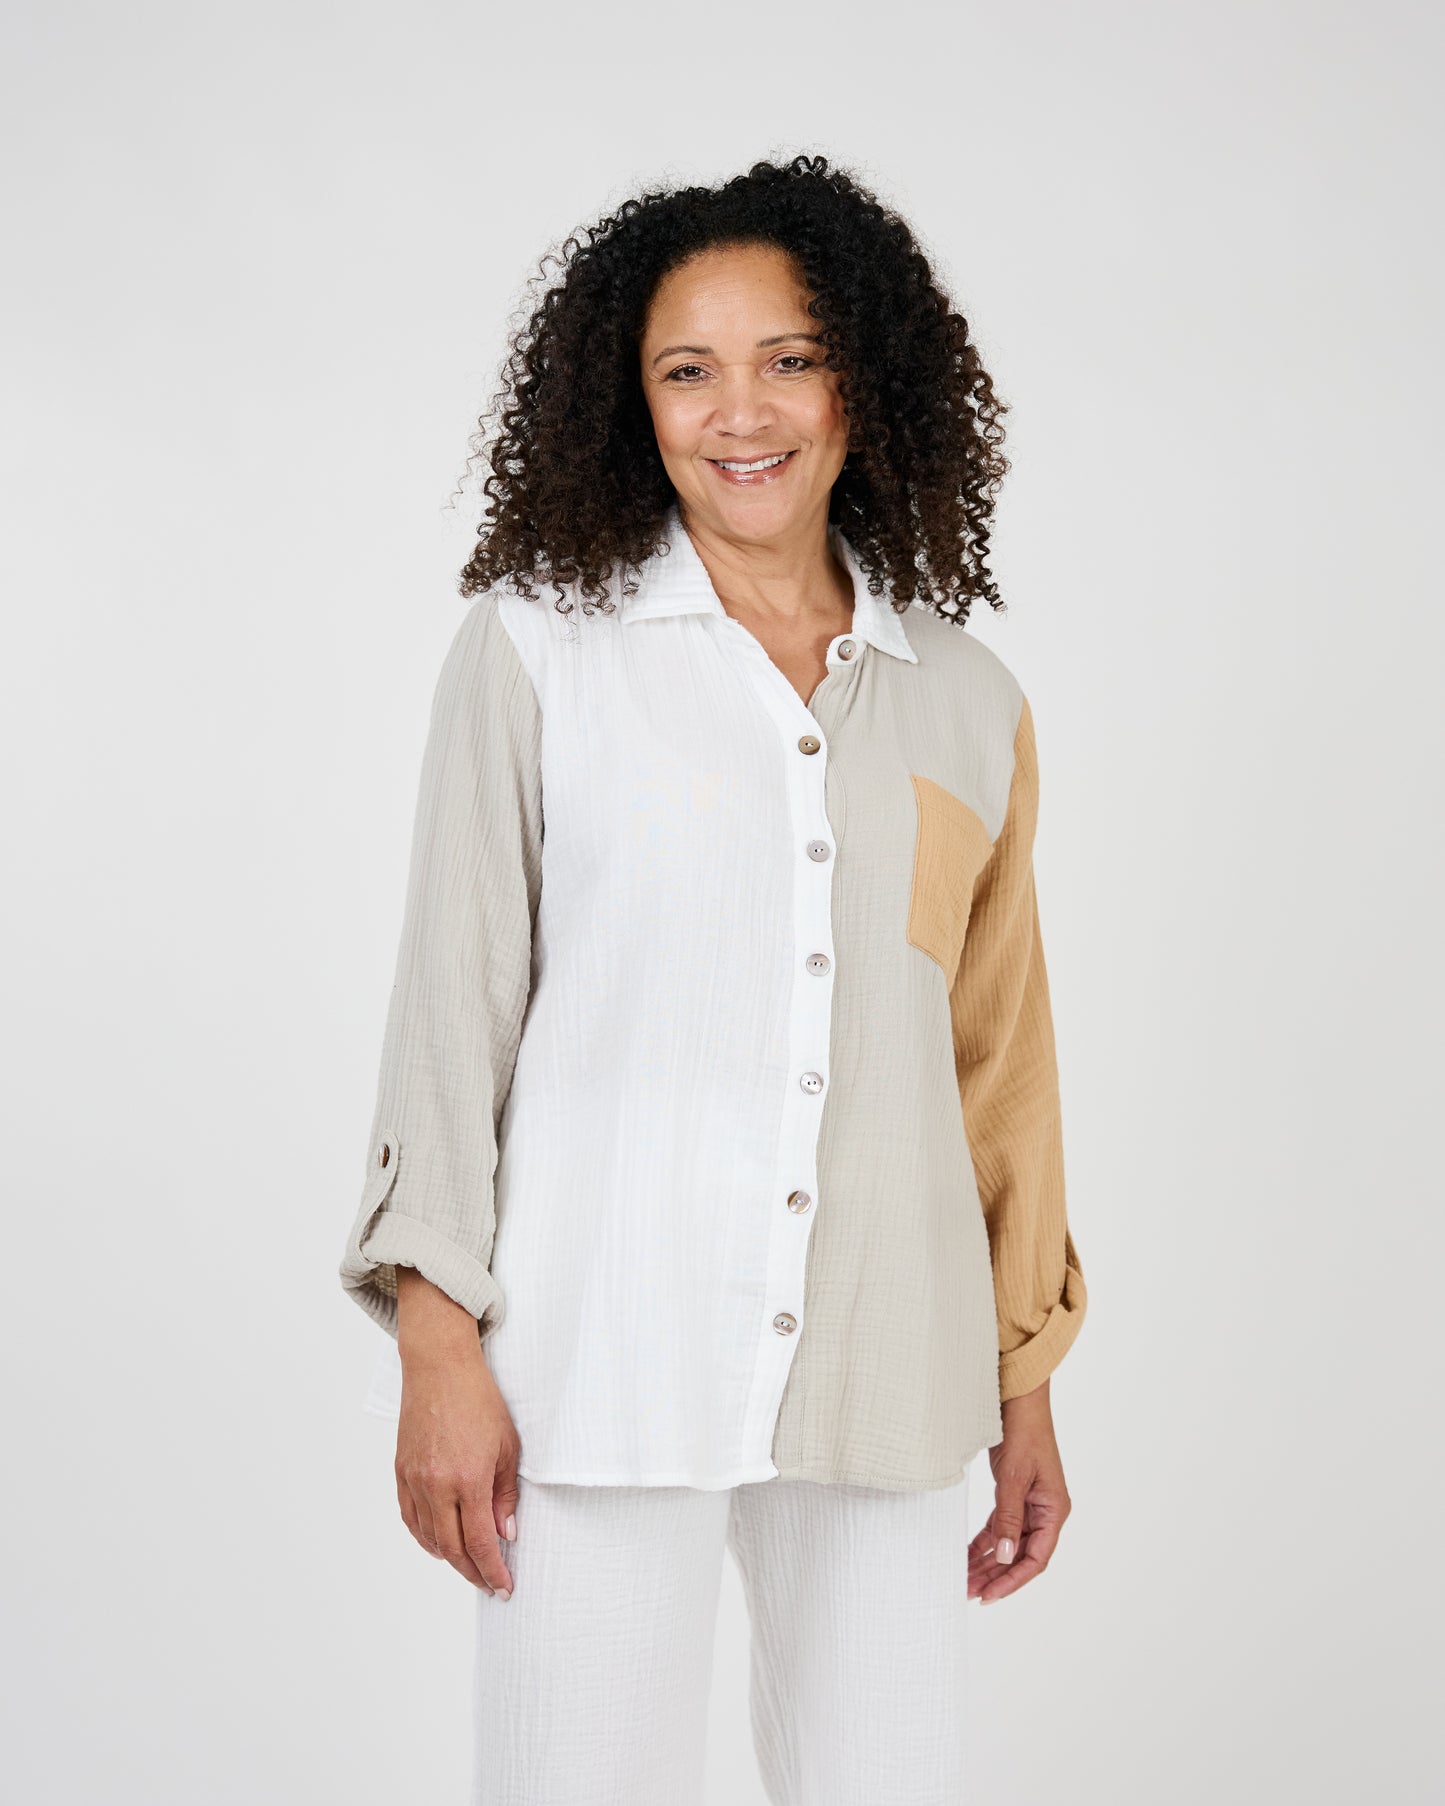 A woman with curly hair smiling, wearing a Shannon Passero Malani Button Up Shirt and white pants against a light background.